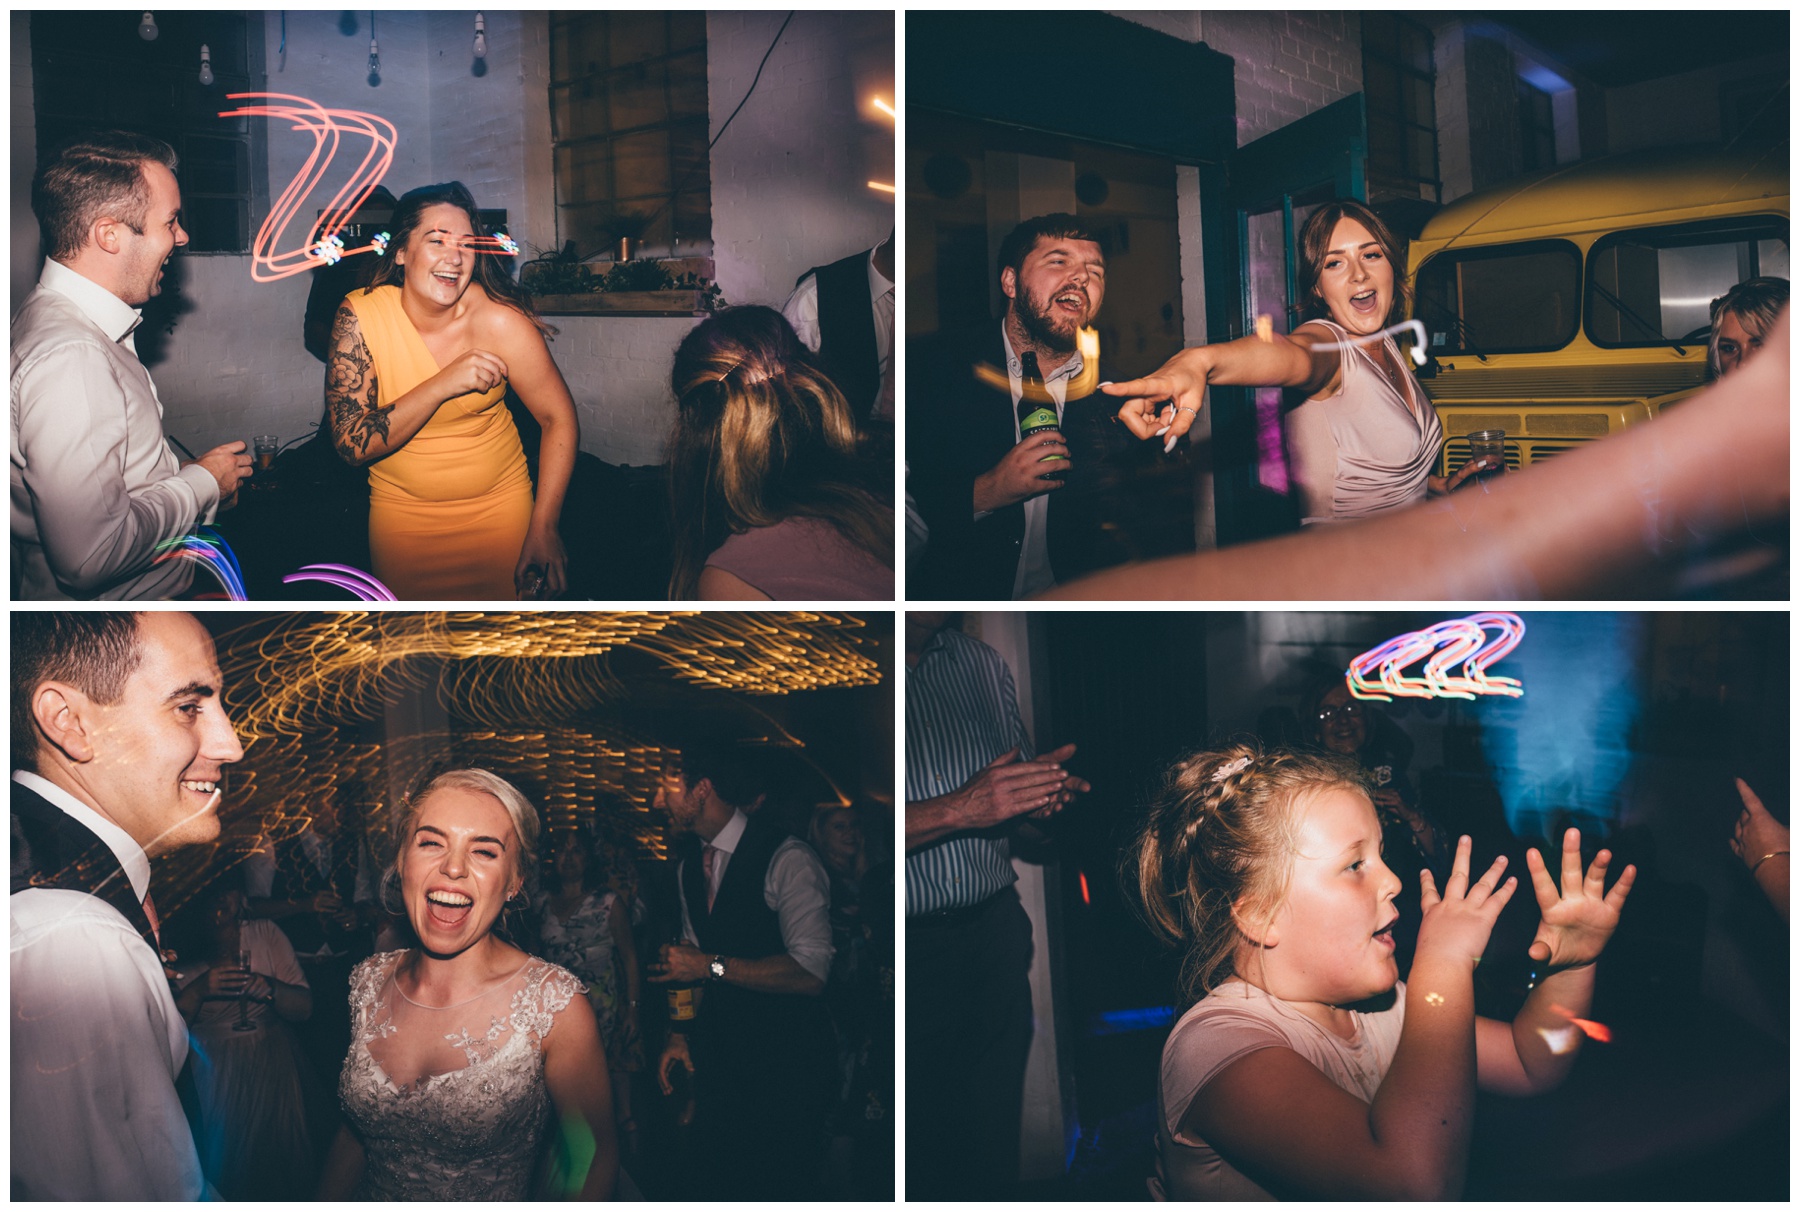 Wedding party fun at the creative space in Sheffield, The Hide, for city centre weddings.